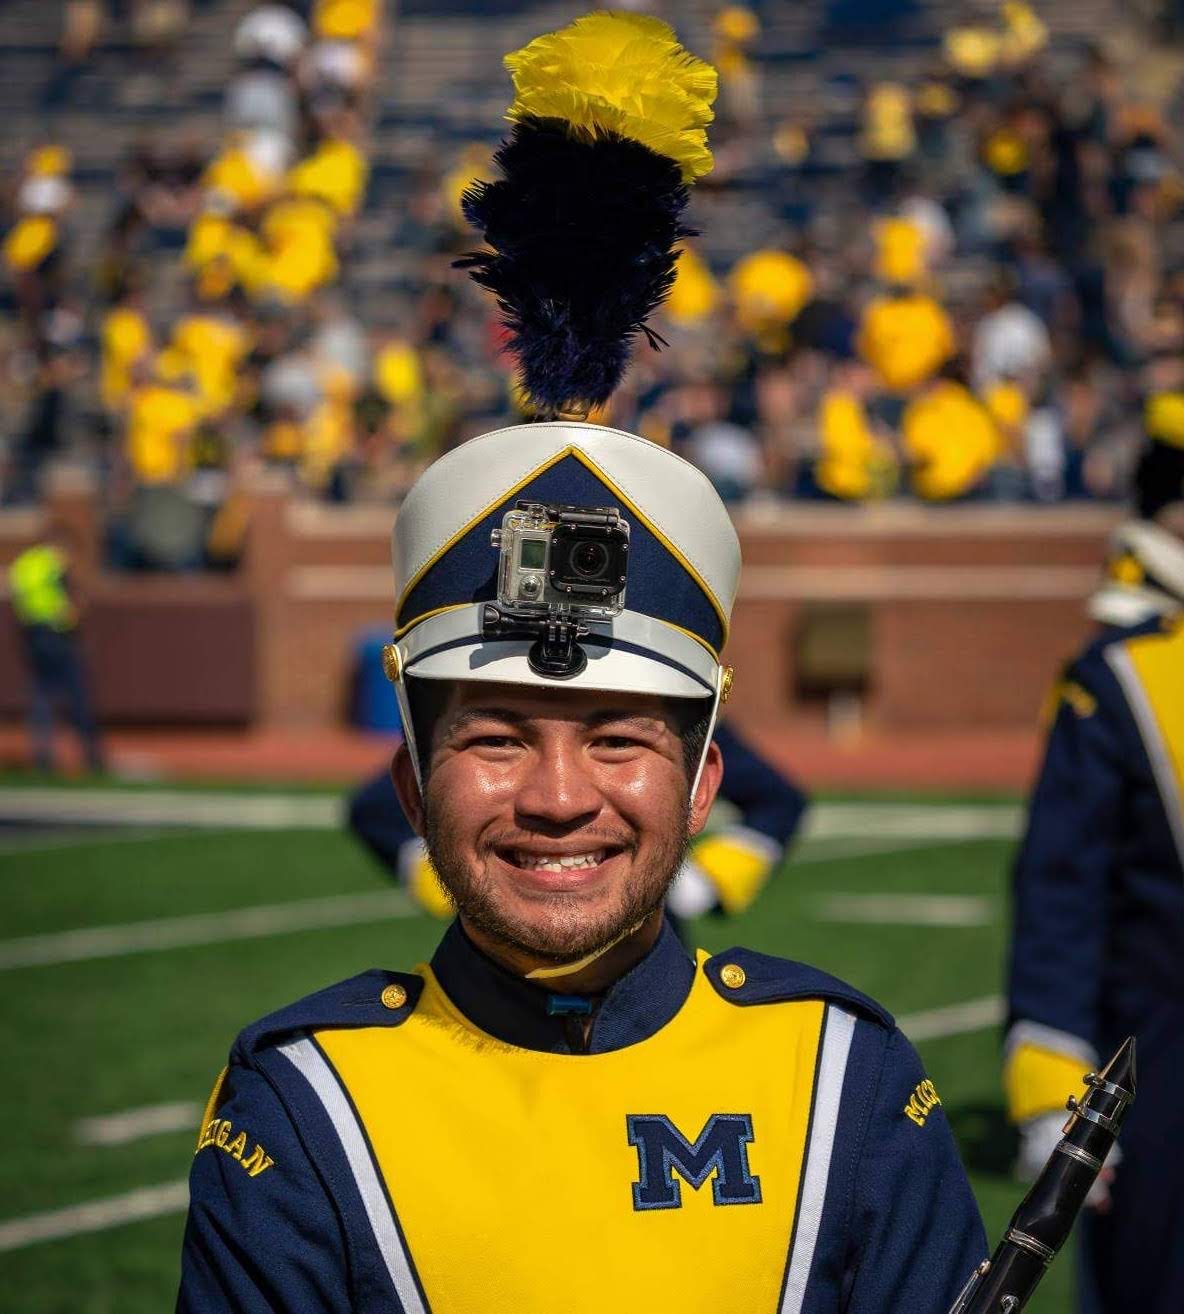 Andrew Arche in his University of Michigan Marching Band uniform